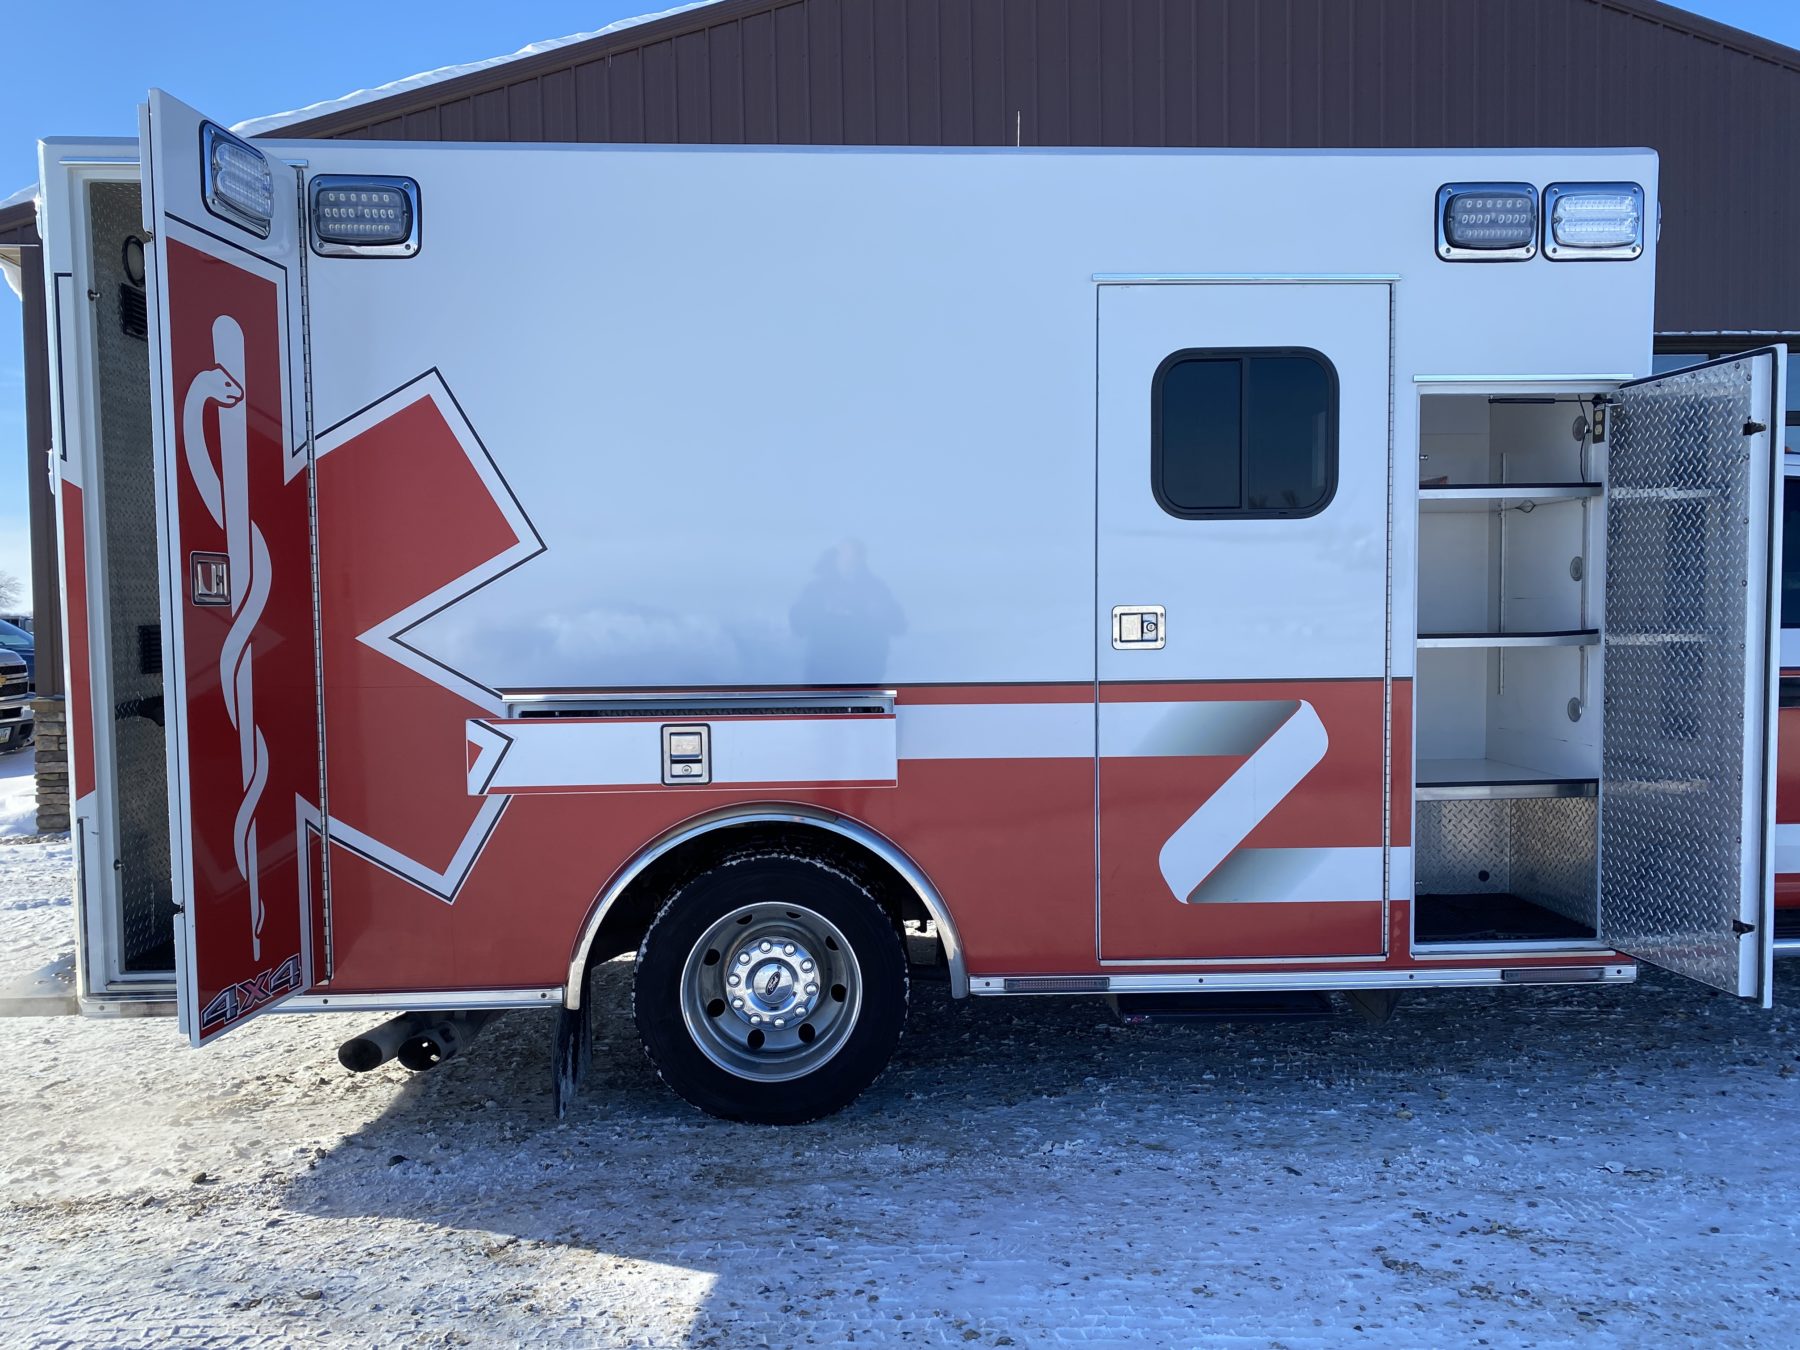 2019 Ford F450 4x4 Heavy Duty Ambulance For Sale – Picture 5